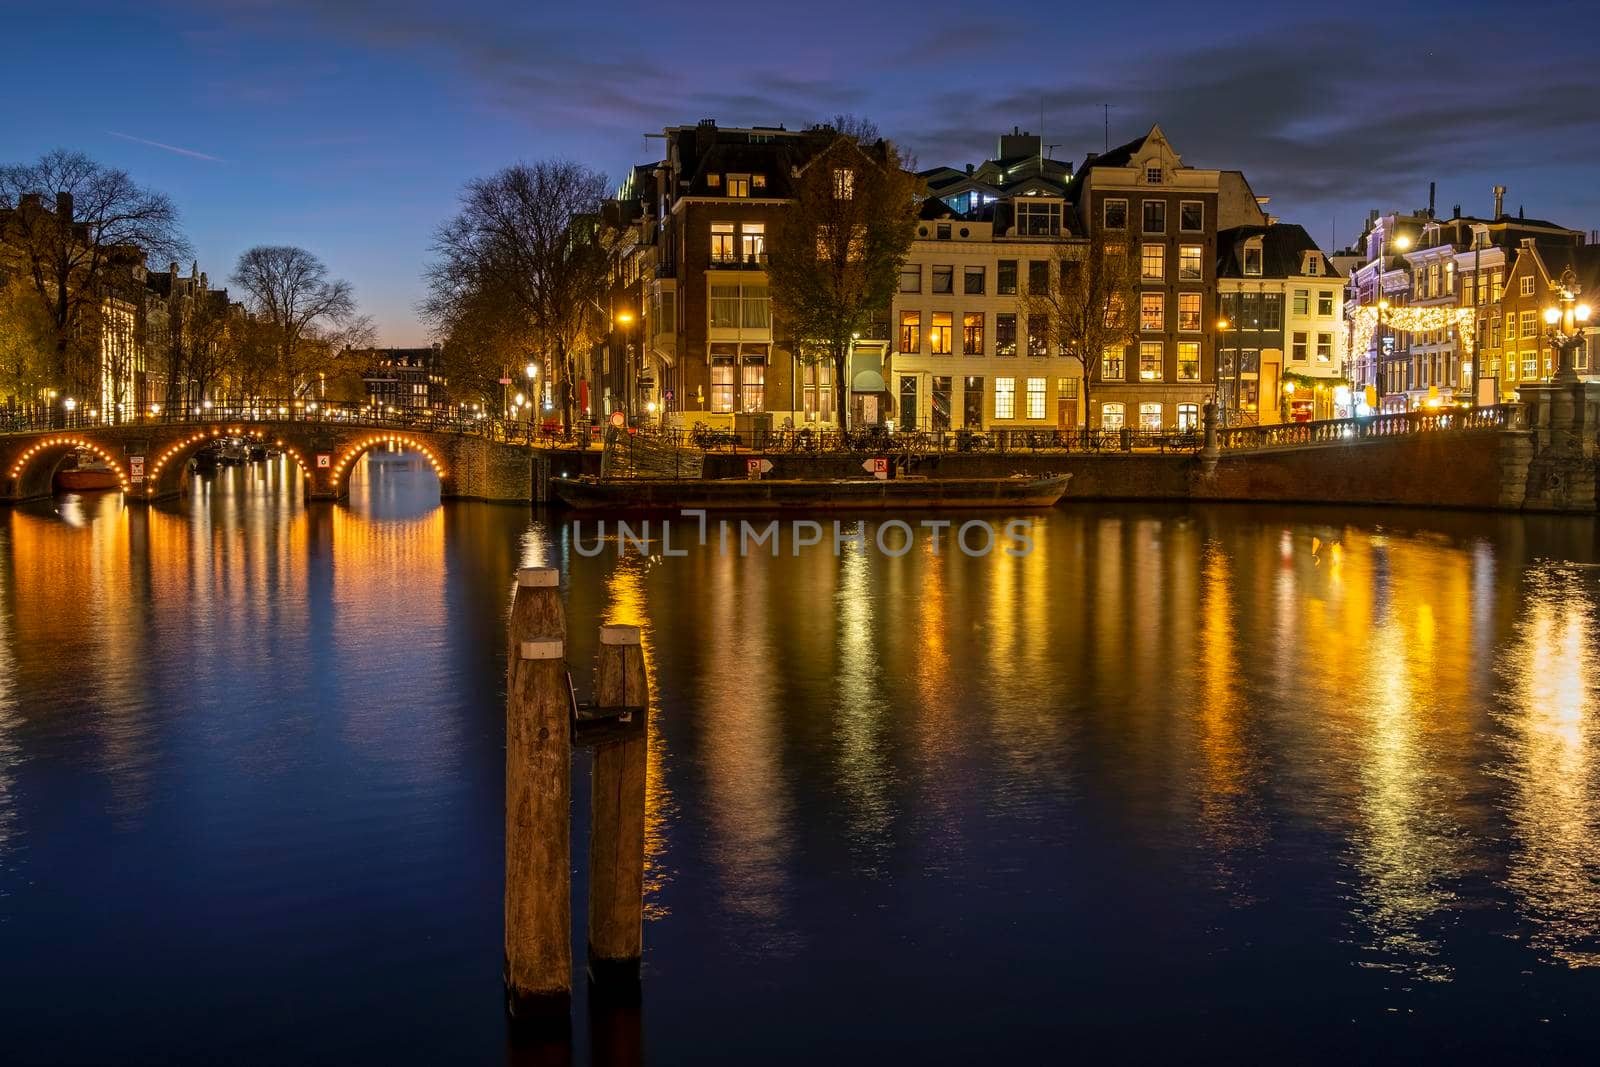 City scenic from Amsterdam at the river Amstel in the Netherlands at sunset by devy